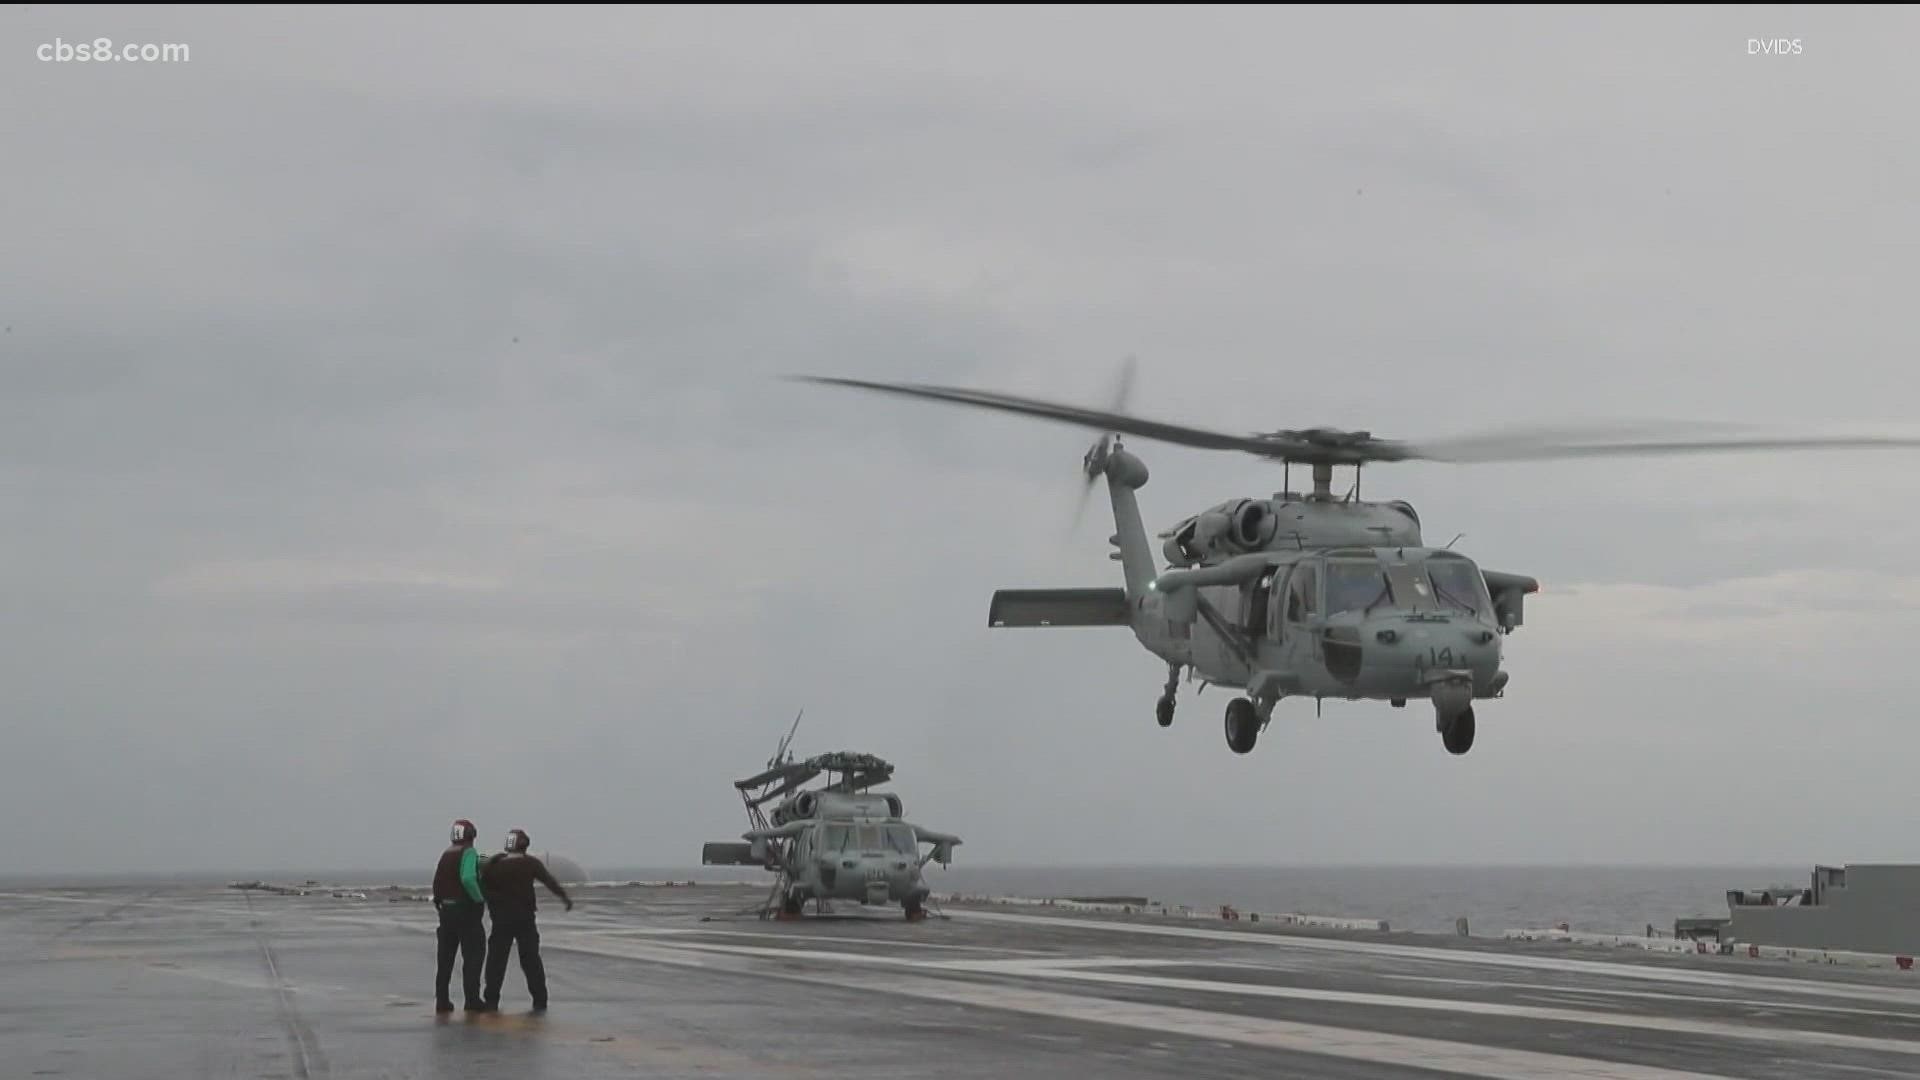 The Navy has shifted from search and rescue efforts to recovery operations on Saturday after more than 72 hours of searching 60 miles off the CA coast.